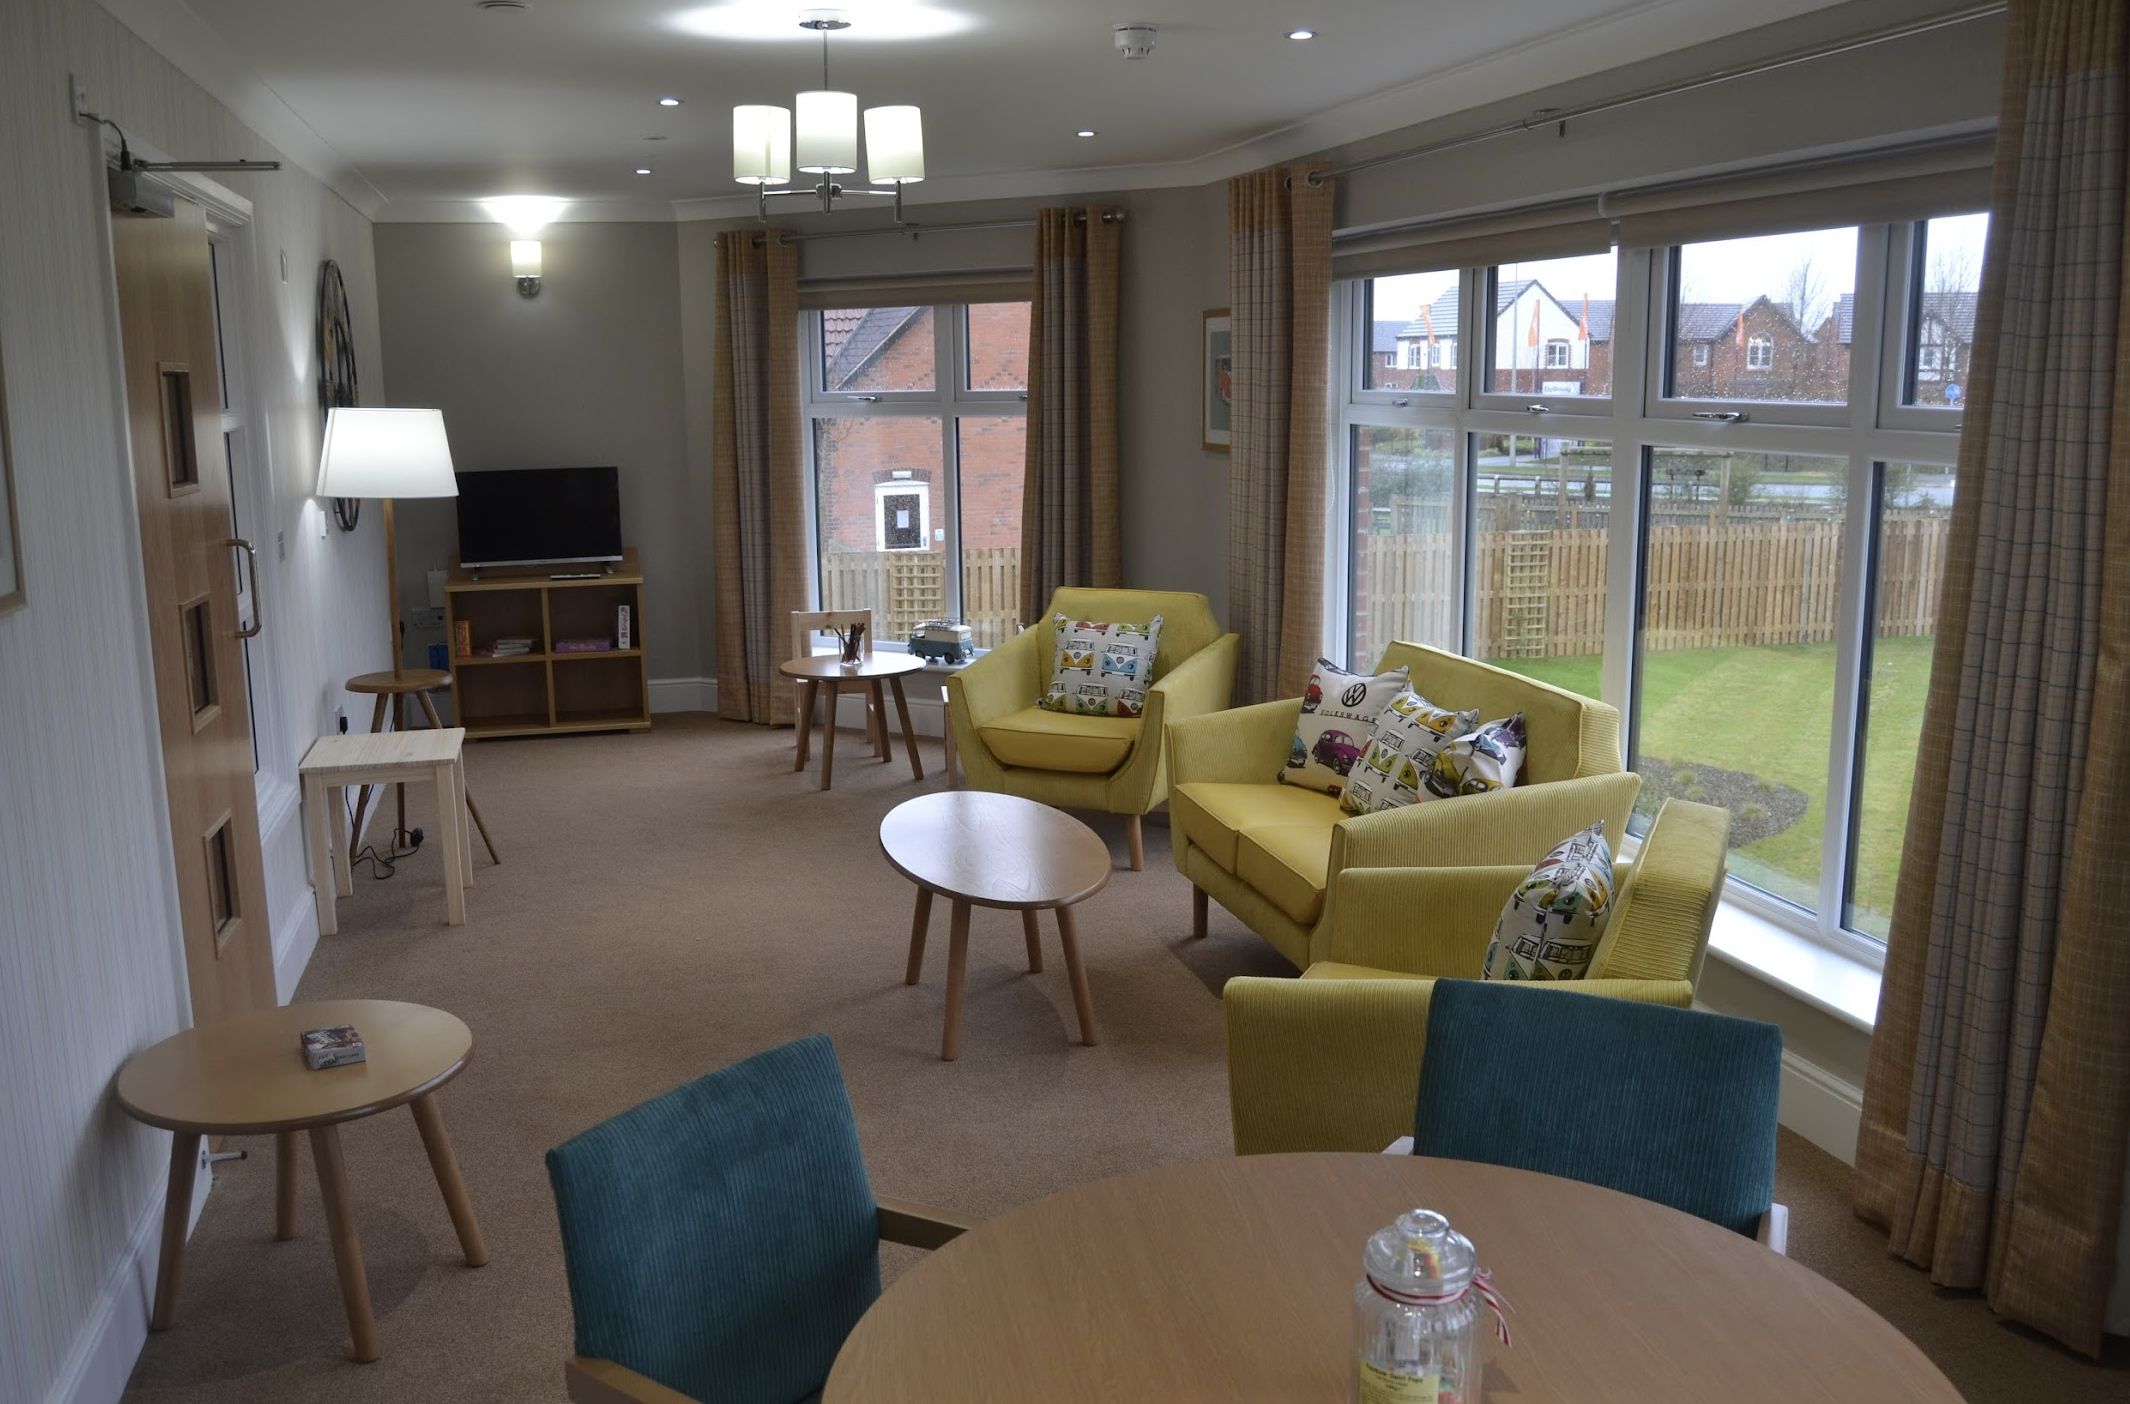 Communal Area of Lostock Lodge Care Home in Northwich, Cheshire